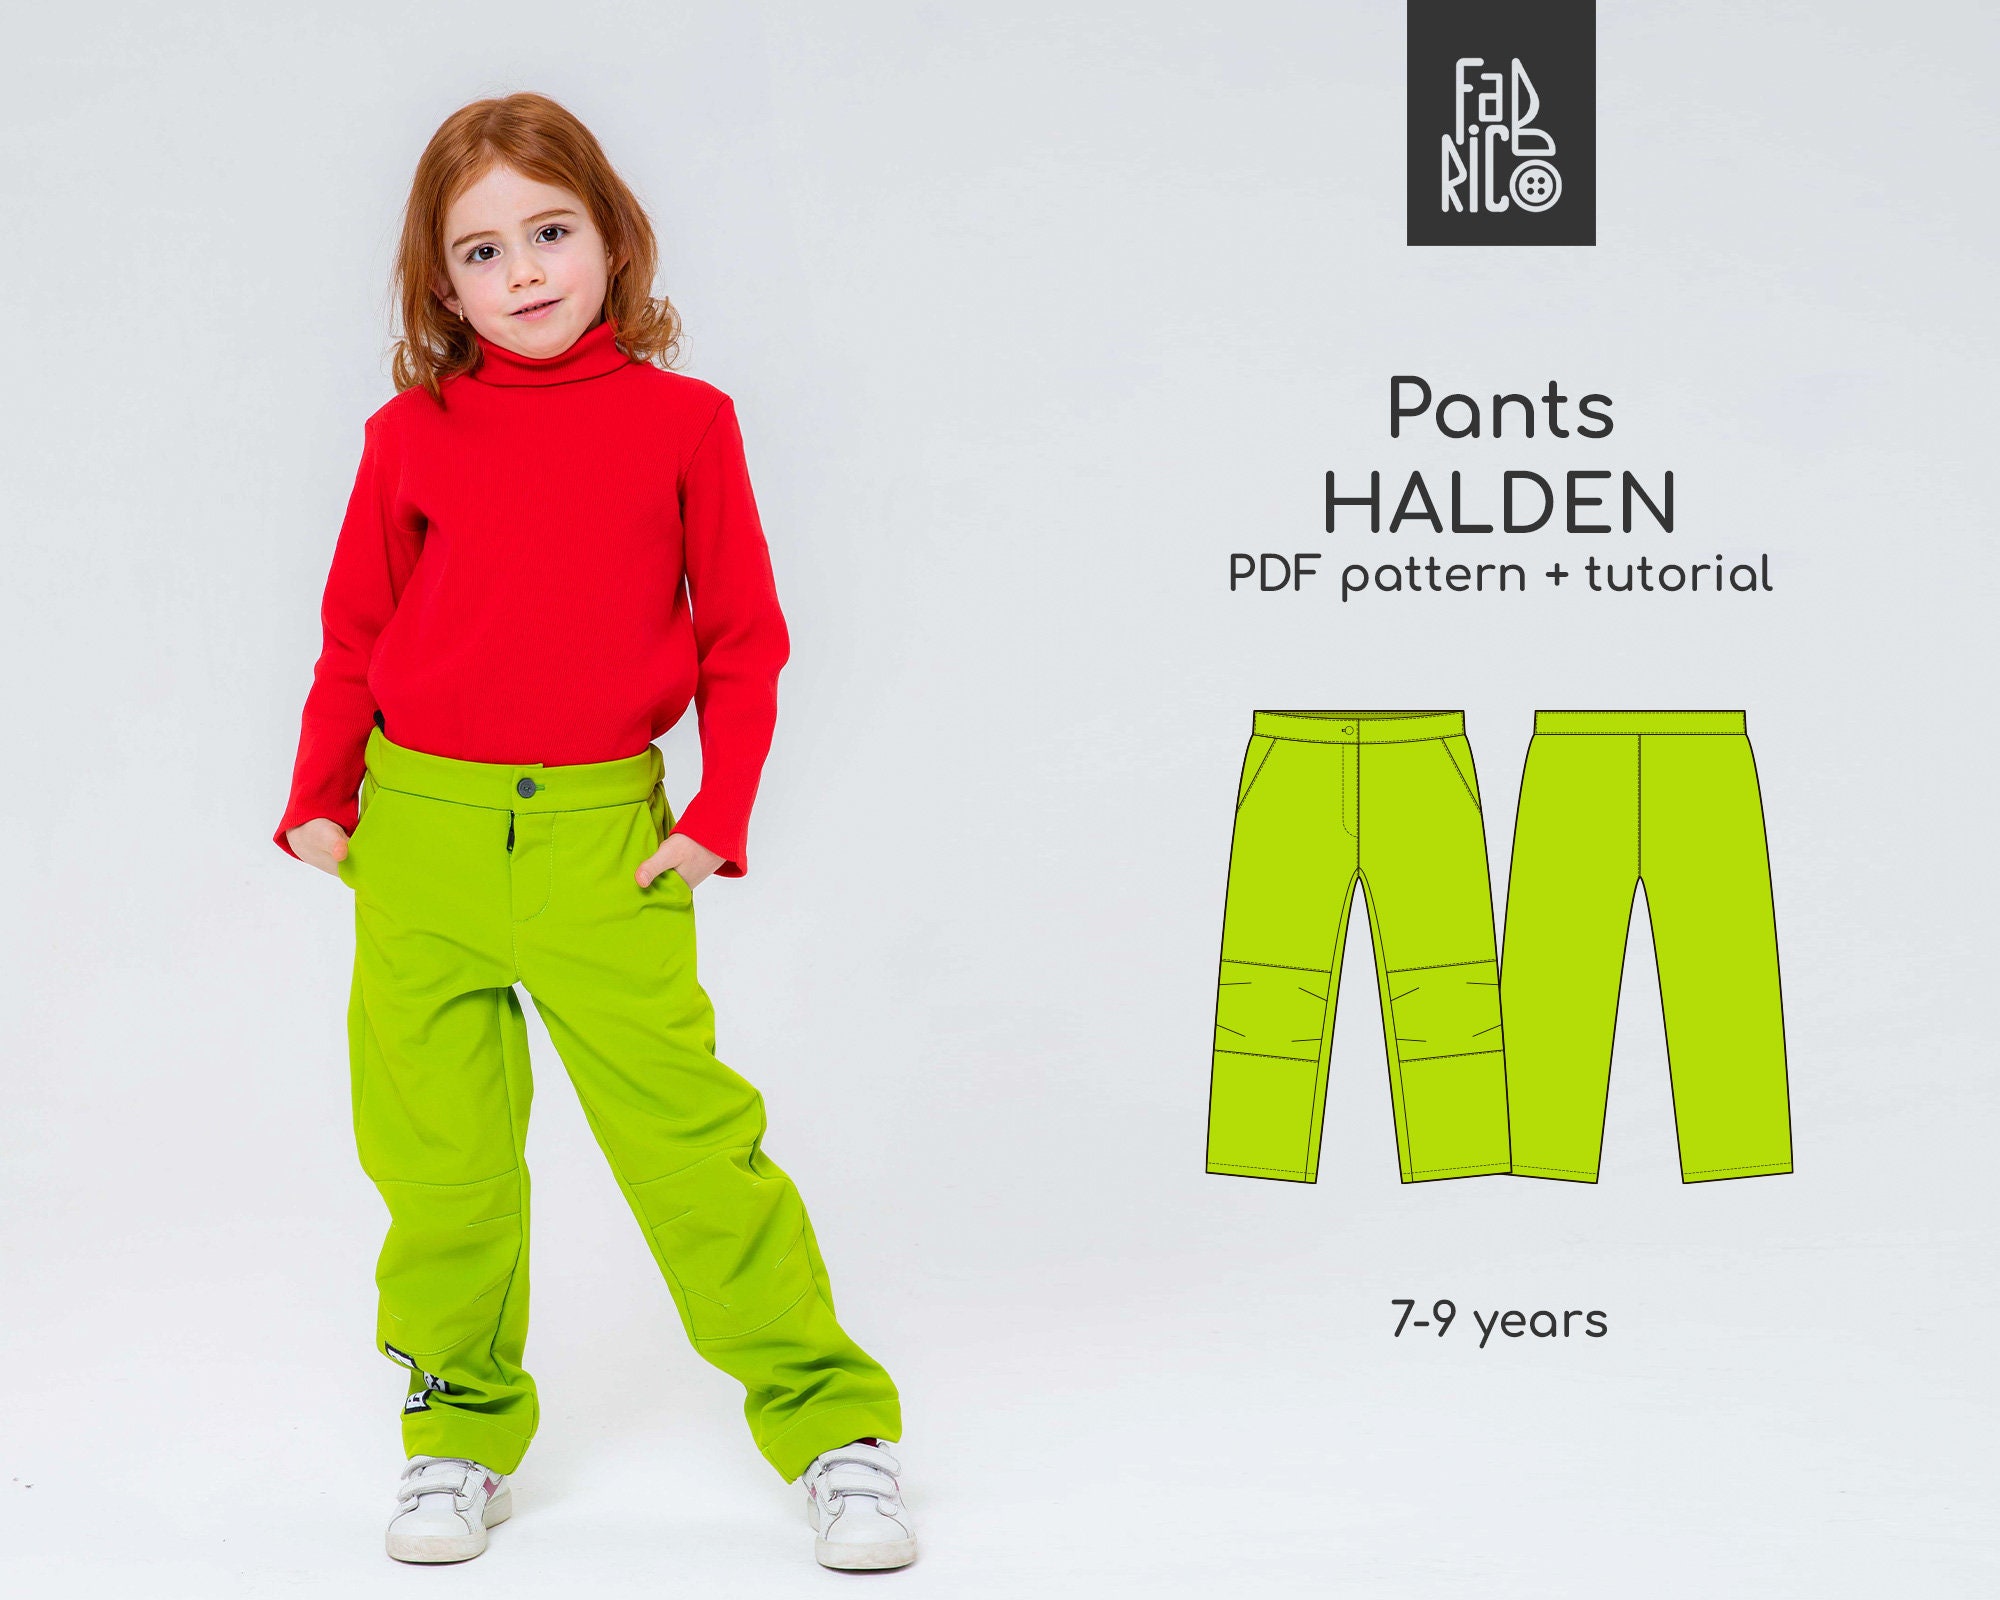 Kids' Lola Shorts and Pants - 5 out of 4 Patterns